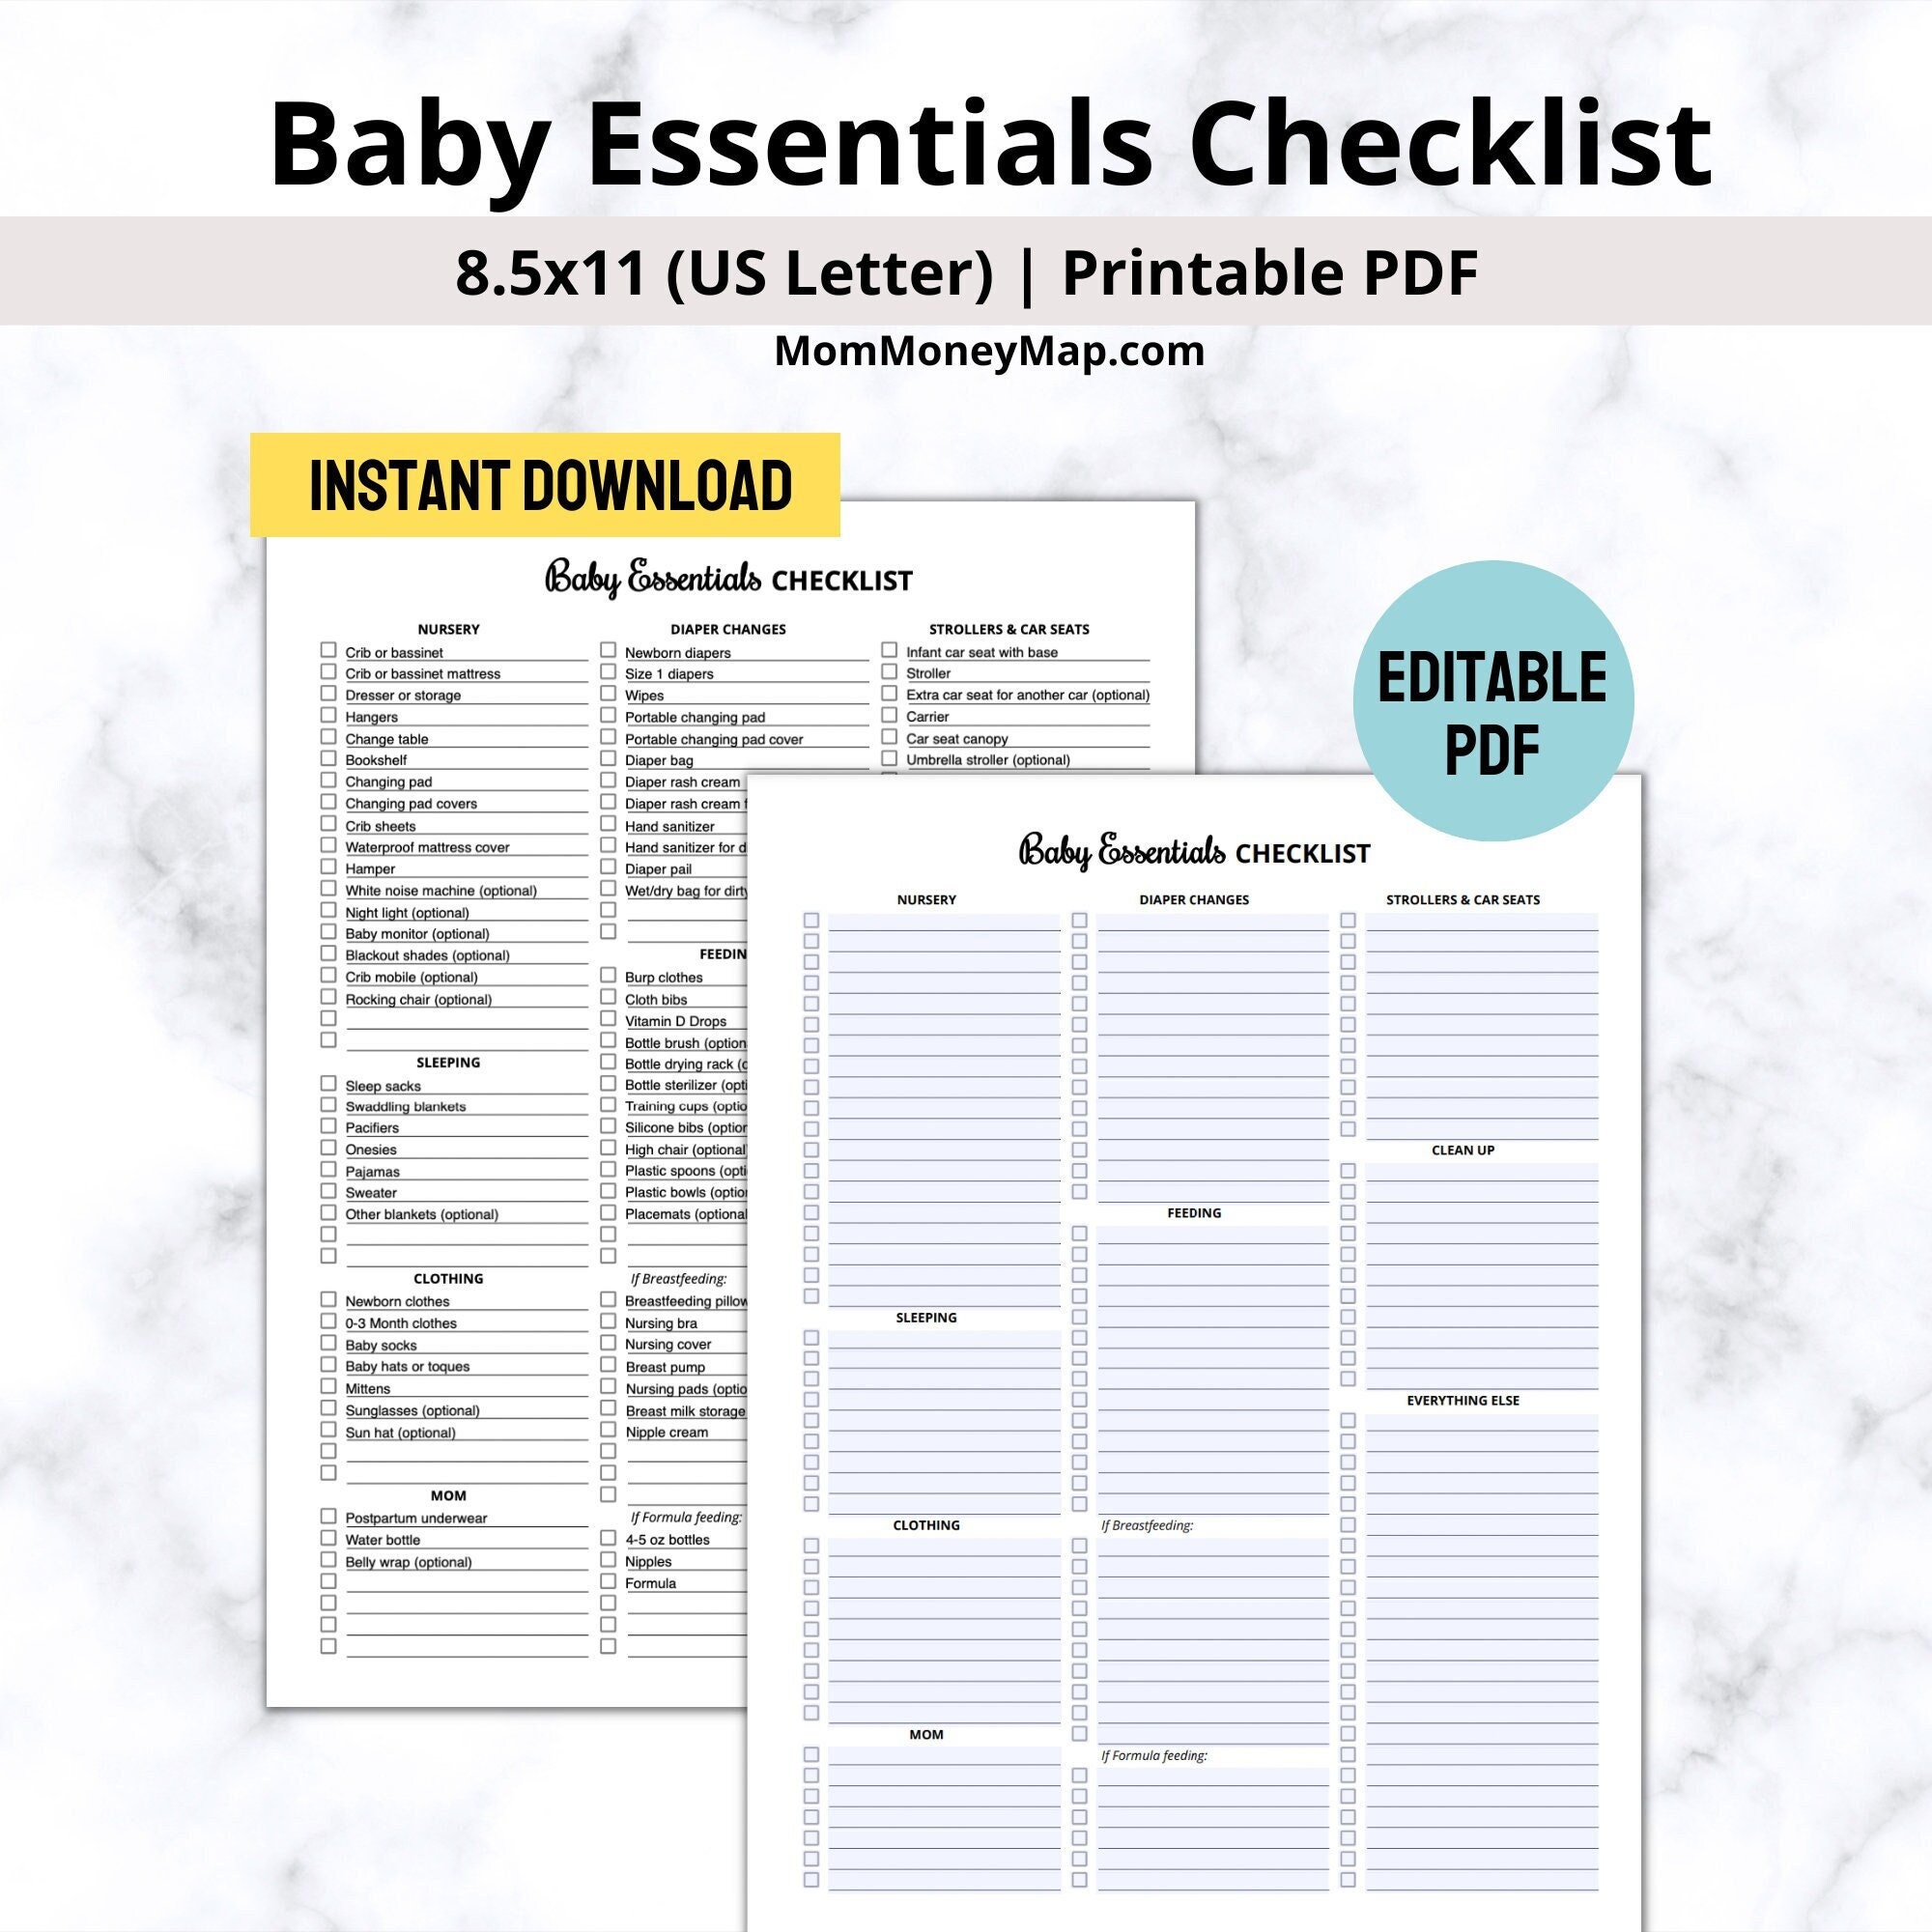 The Ultimate Checklist of Baby Essentials – Fancy Fluff